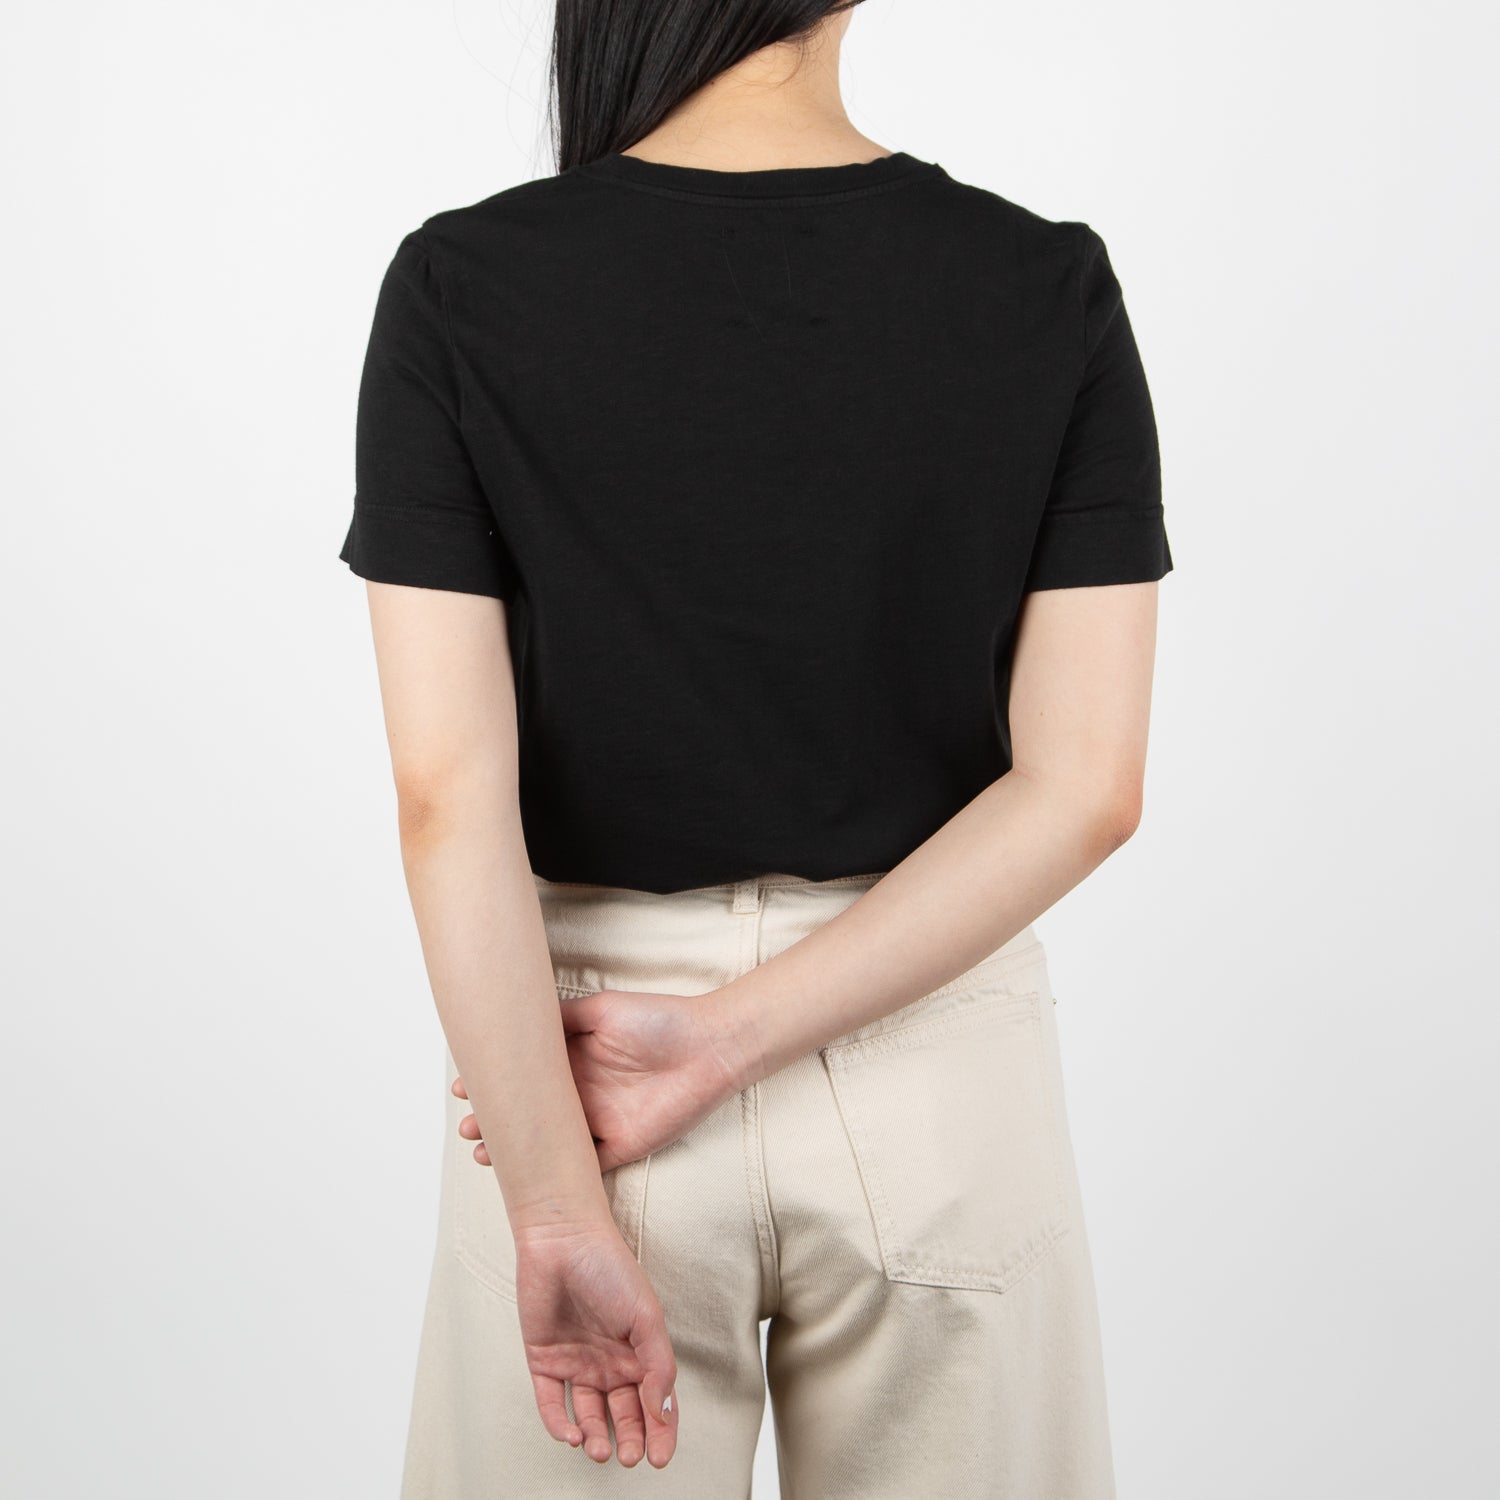 classic black woven shirt with phrase by Secret Location Concept Store